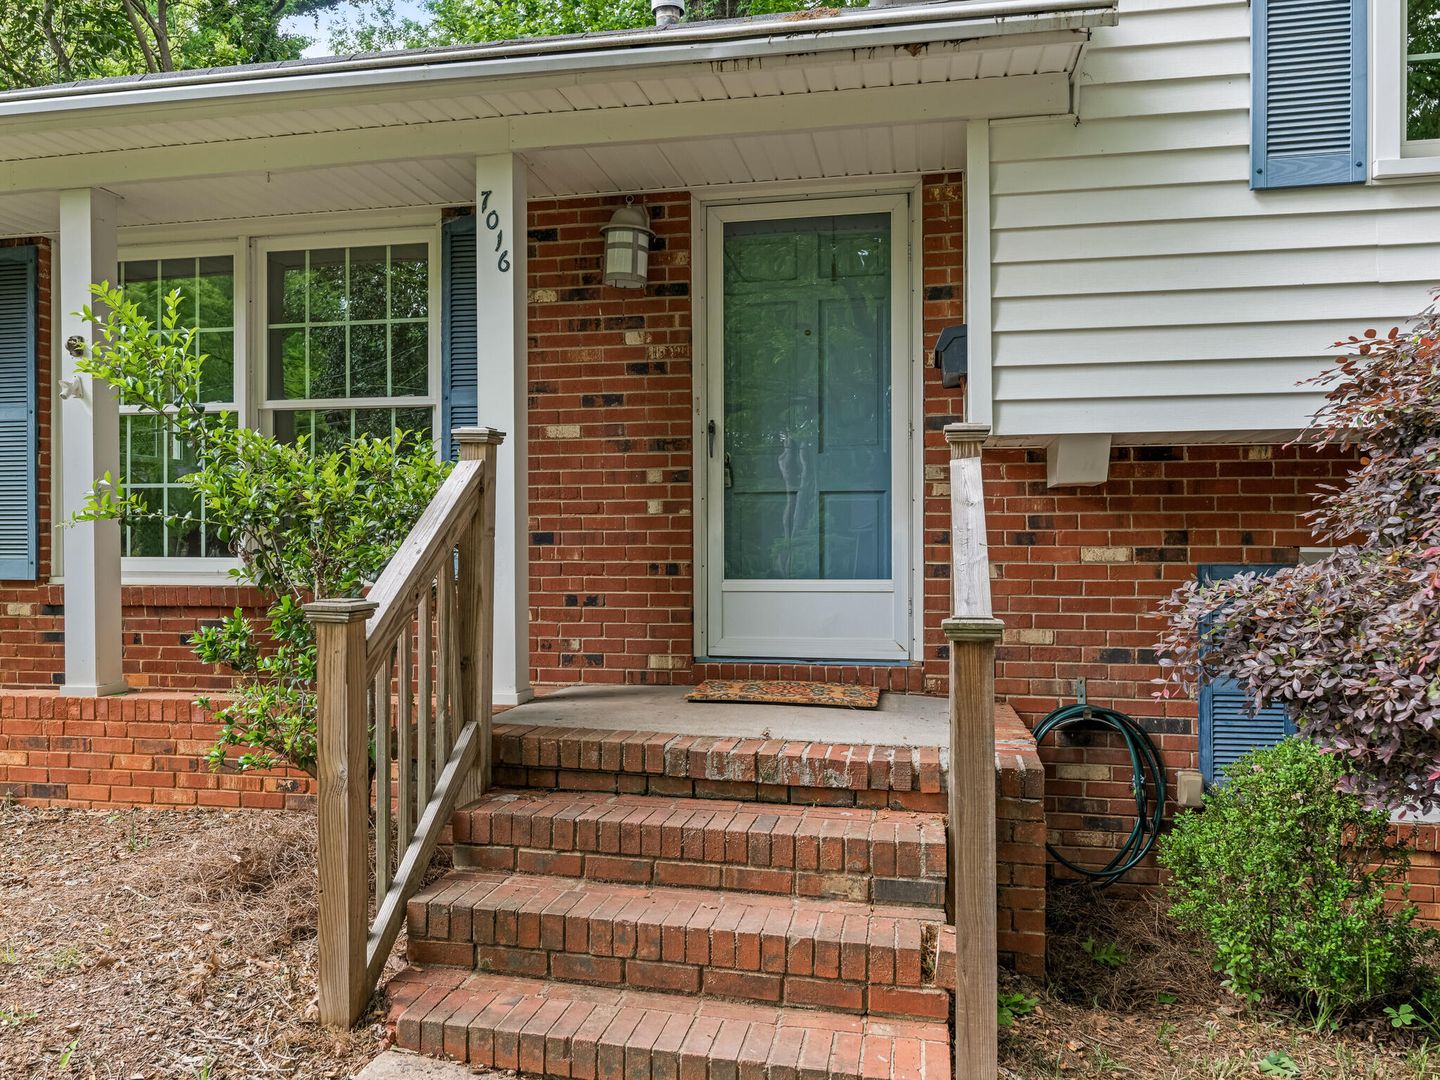 Charming Tri-Level Home In Starmount!